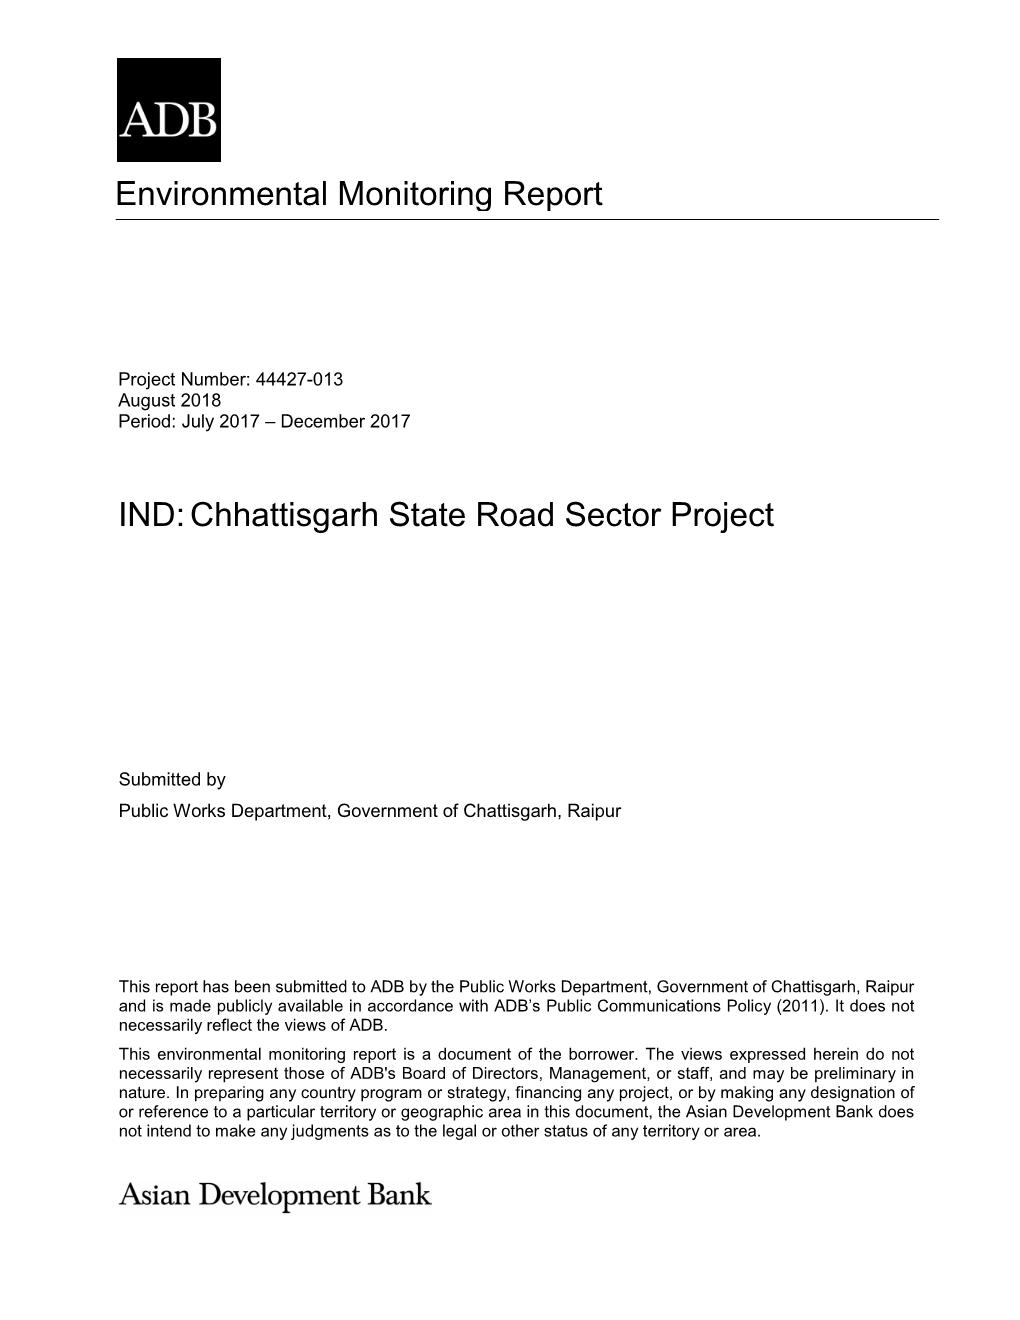 IND:Chhattisgarh State Road Sector Project